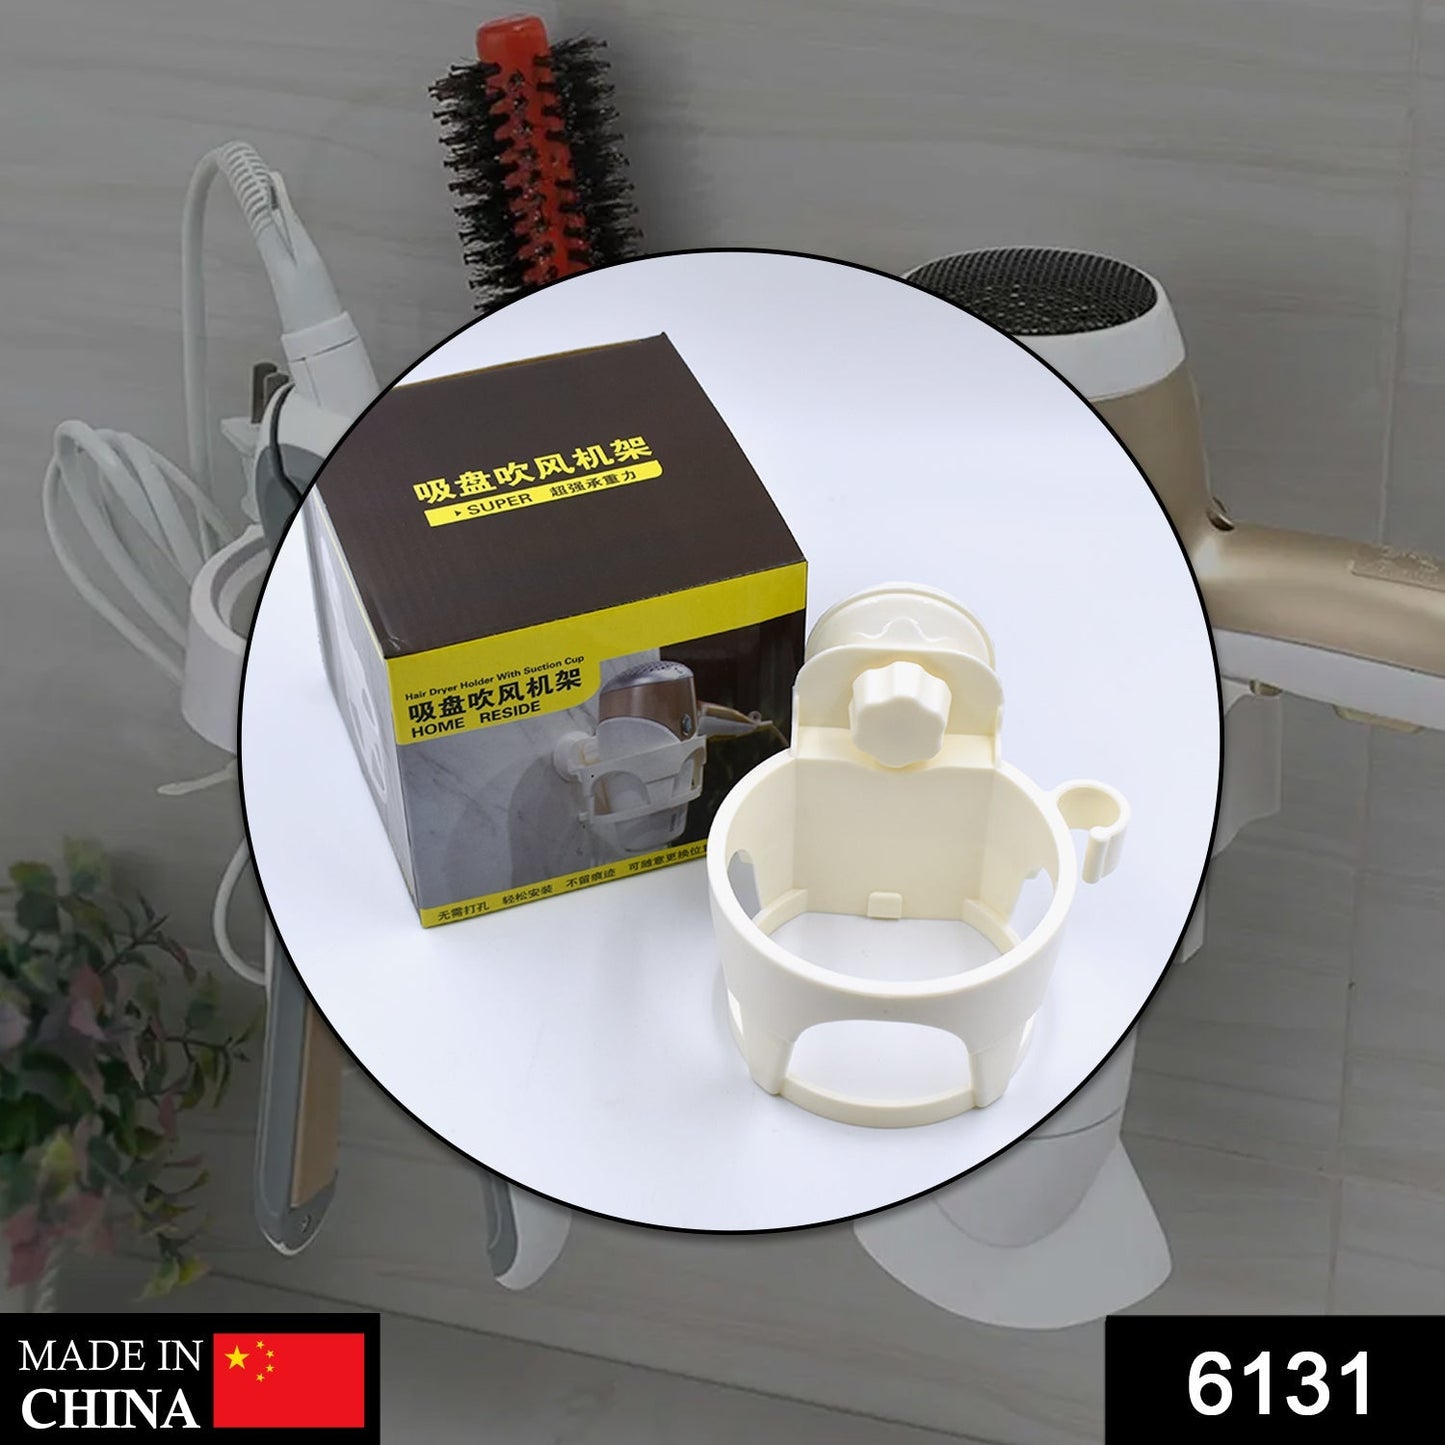 6131 Hair D Holder W Suction used in all kinds of household and official places specially by women's and girls for their hair.